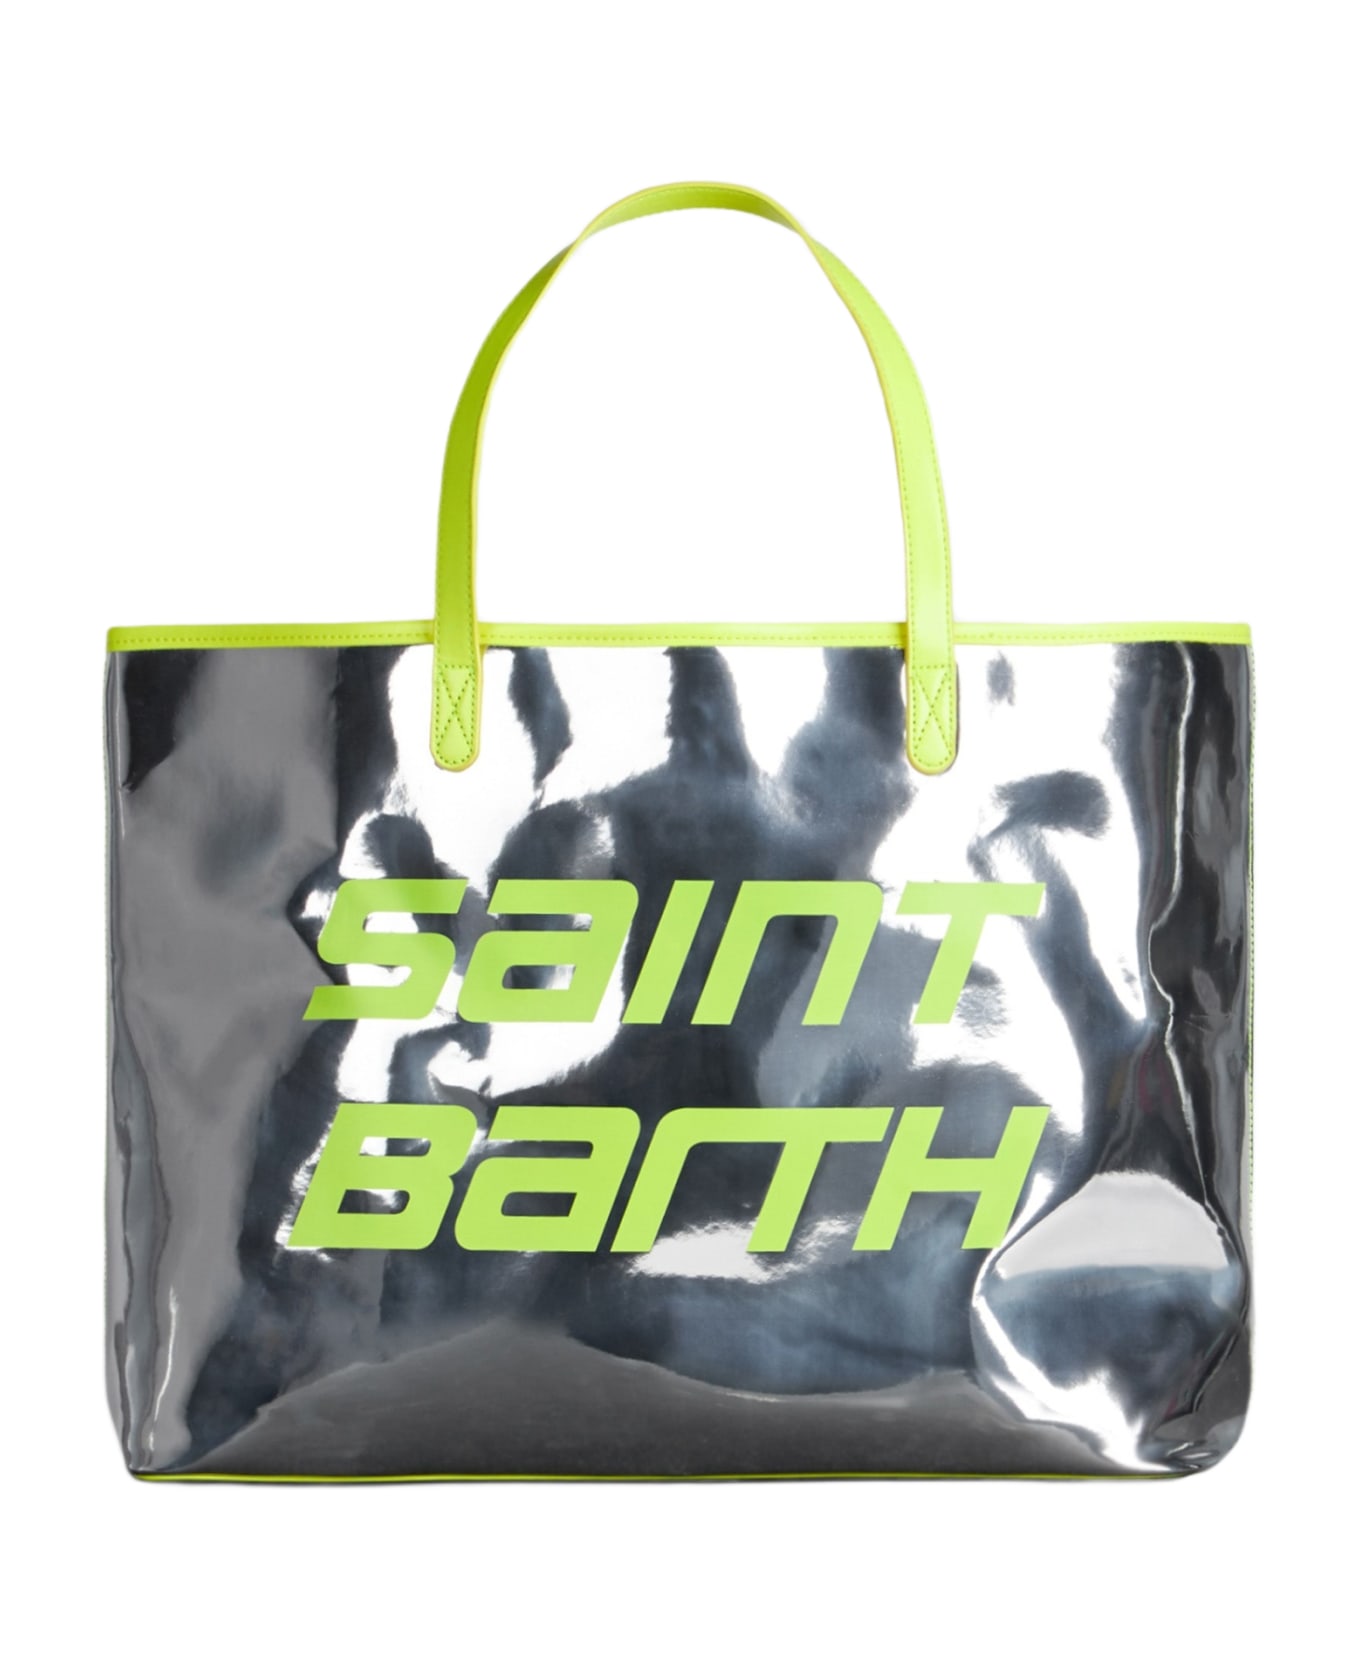 MC2 Saint Barth Silver Reflex Bag With Fluo Yellow Details - YELLOW トートバッグ